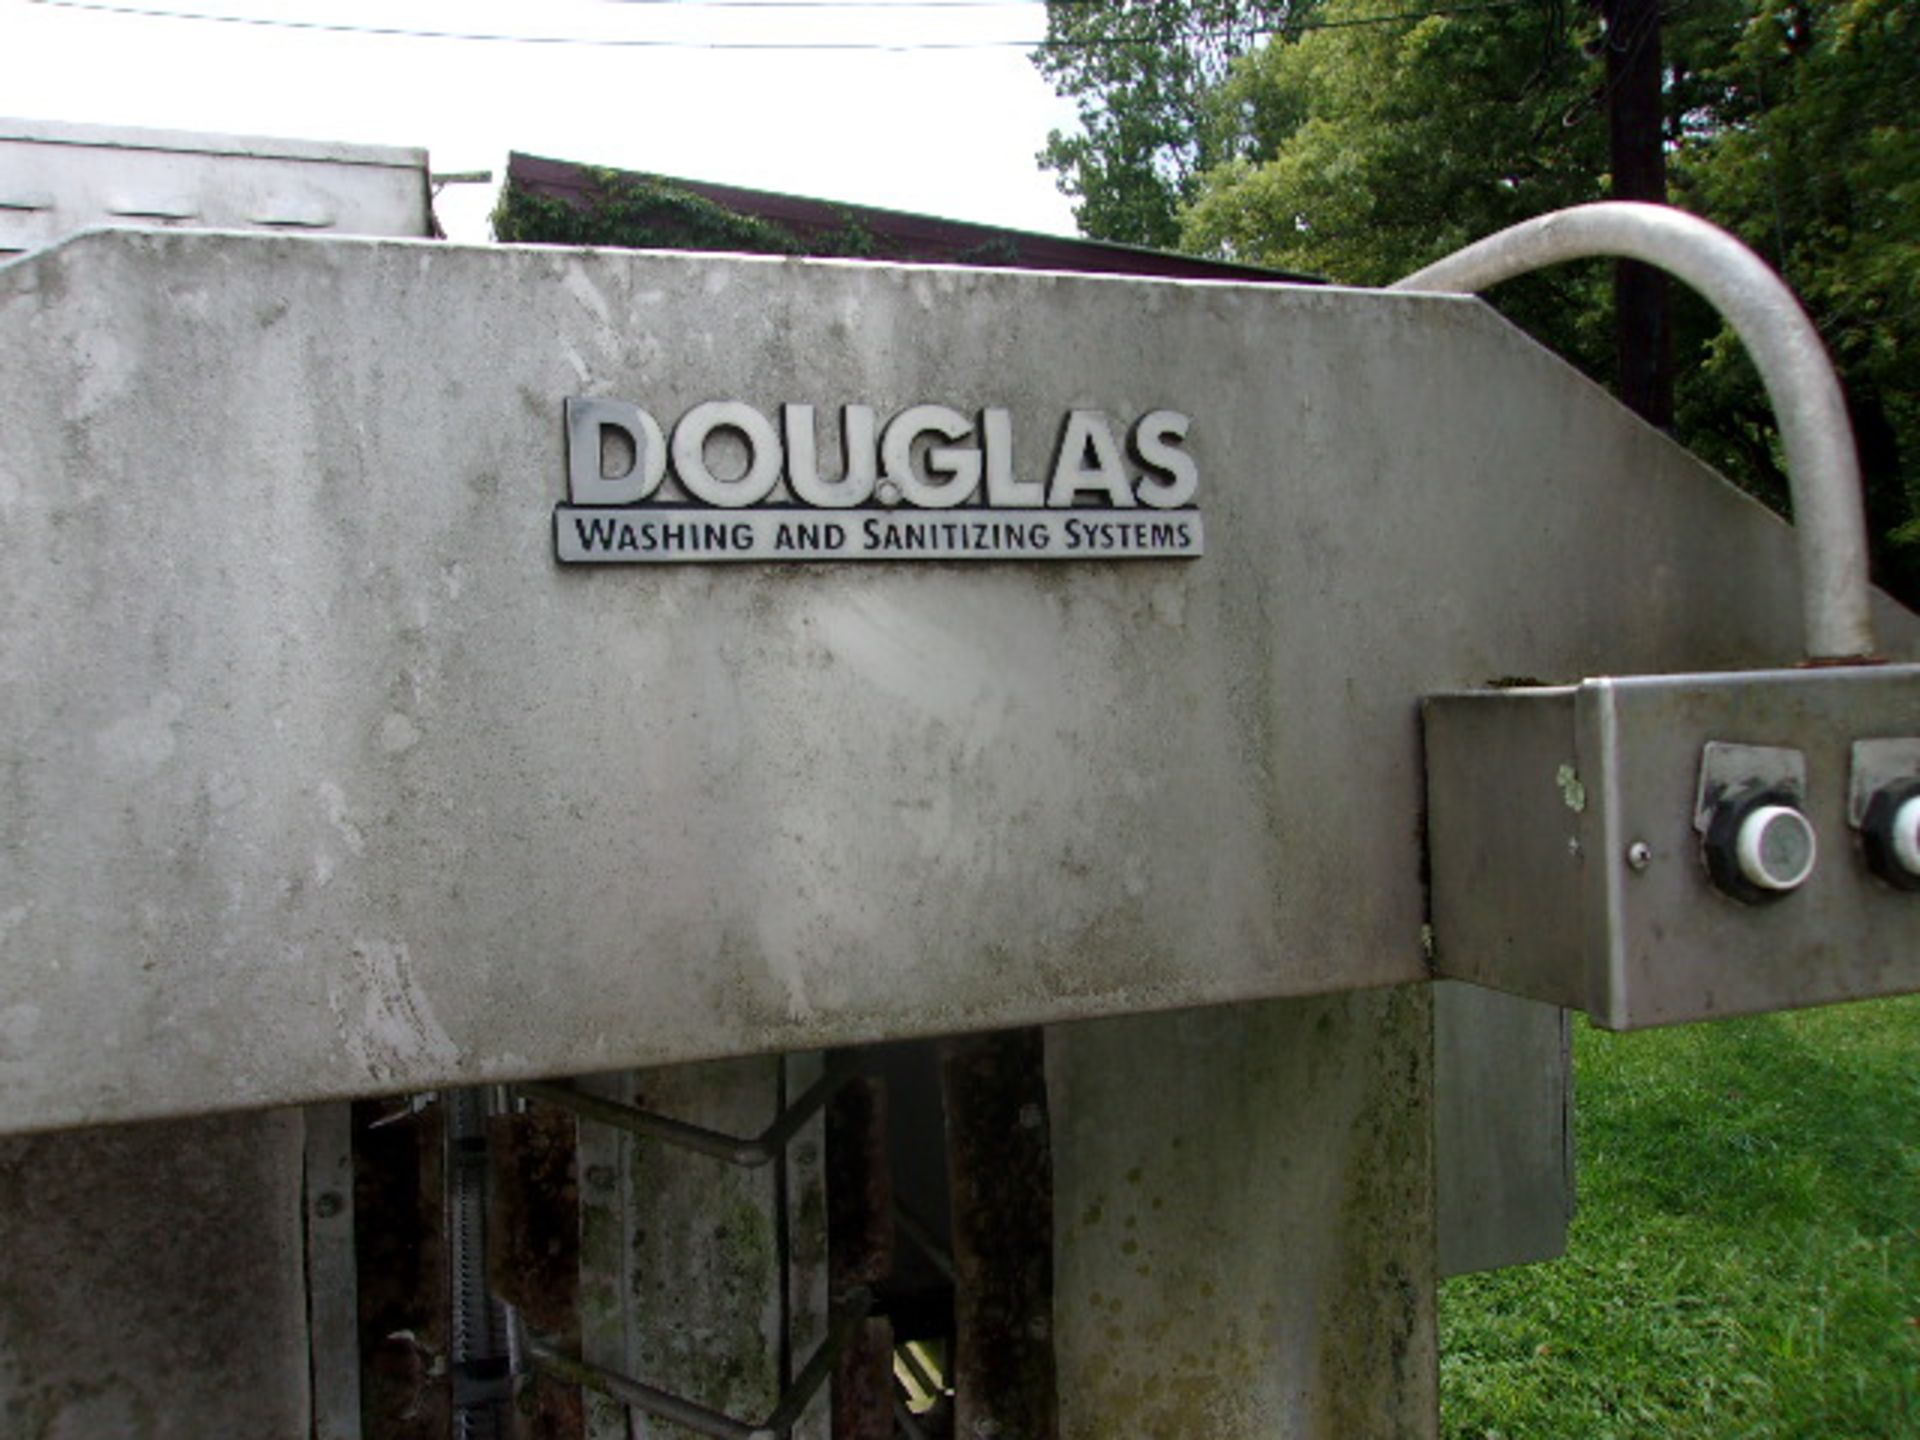 Douglas Tray Washer (Located Glouster, OH) Athens County - Image 2 of 6